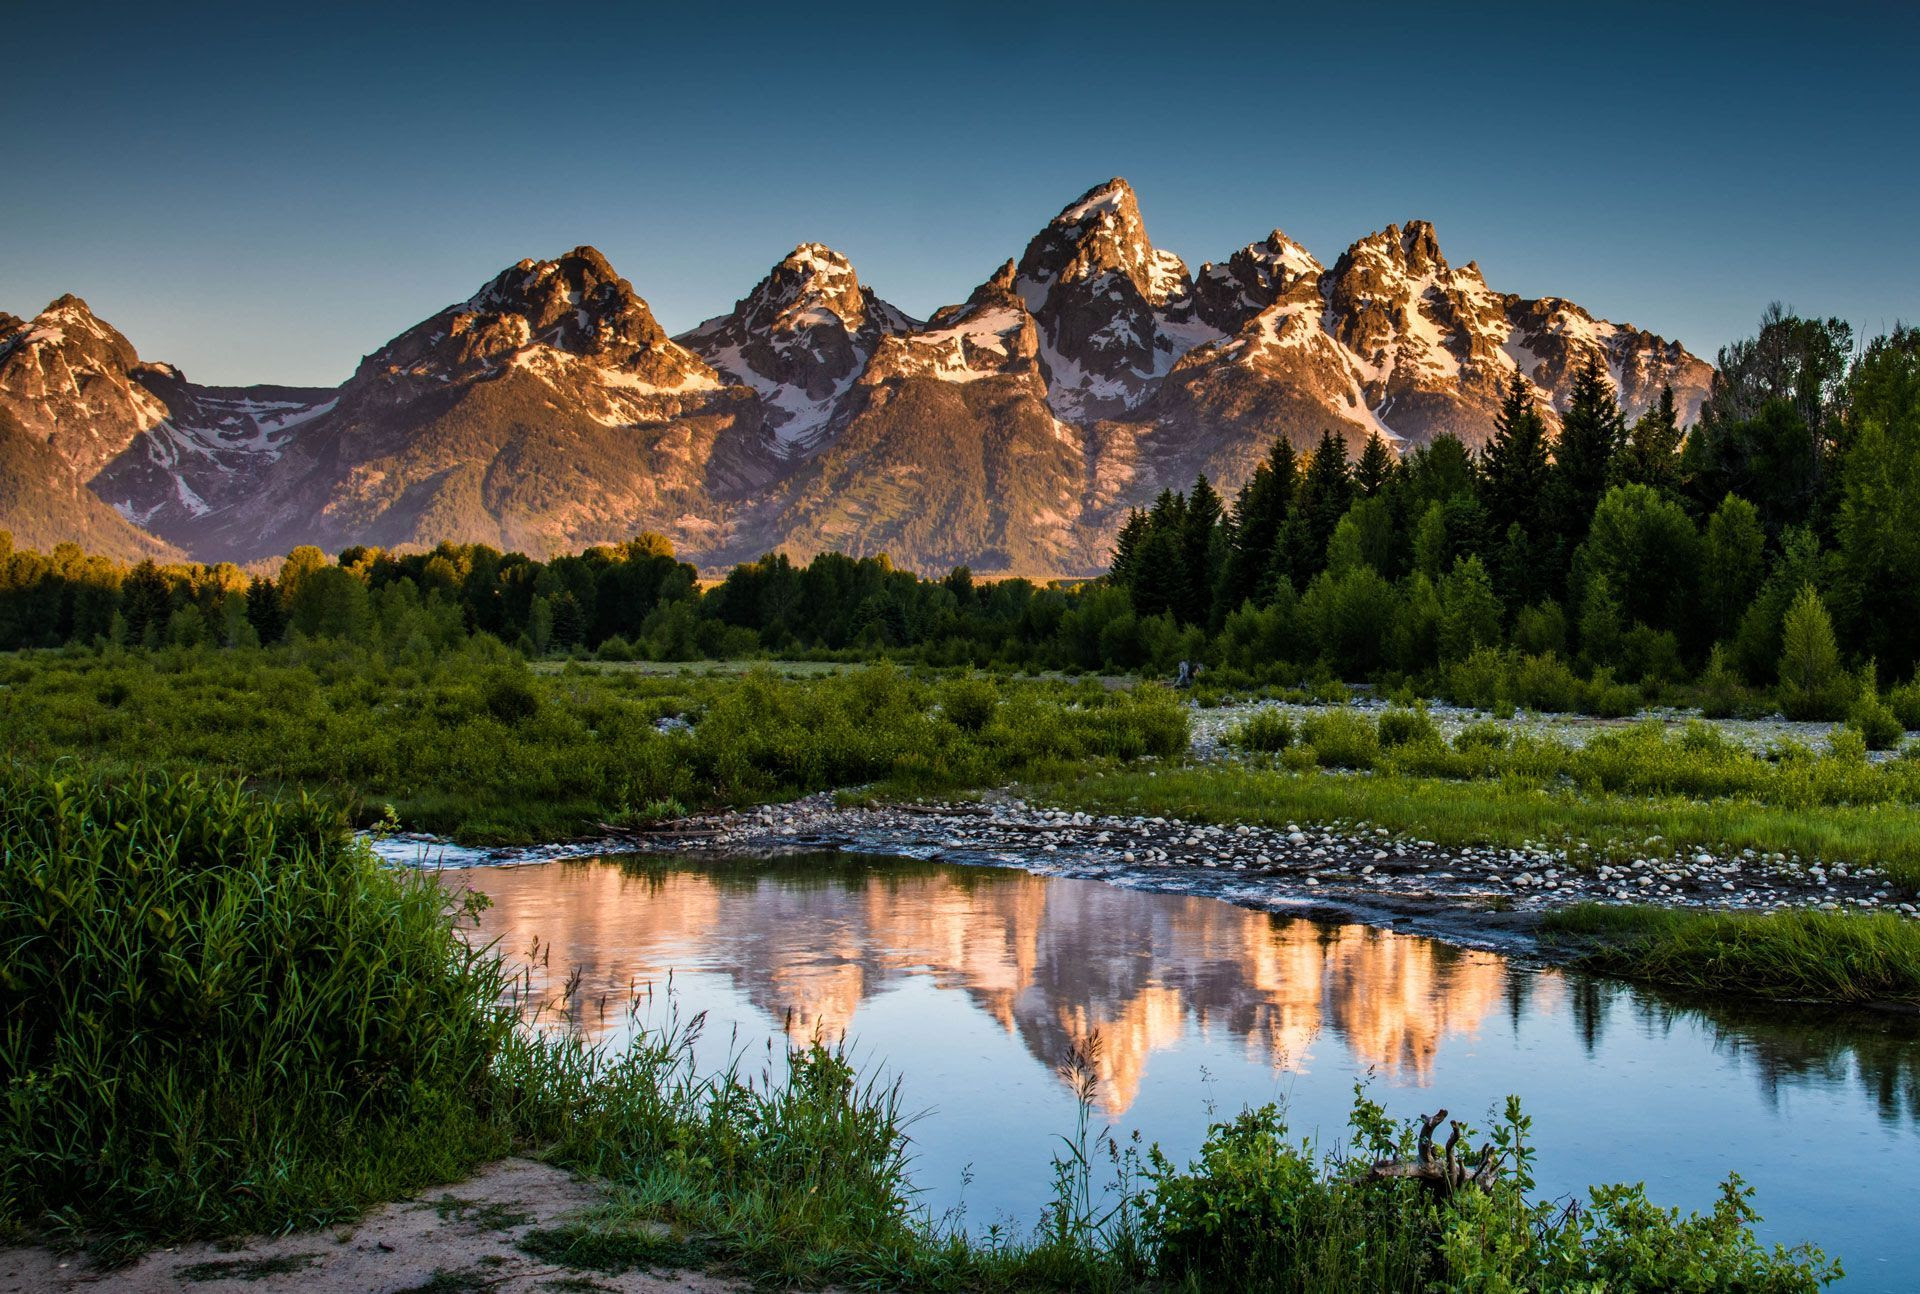 Most sites offer standard amenities including modern comfort stations, potable water, metal fire grates, picnic tables, and metal bear boxes. 7 best places to photograph Grand Teton National Park to capture the